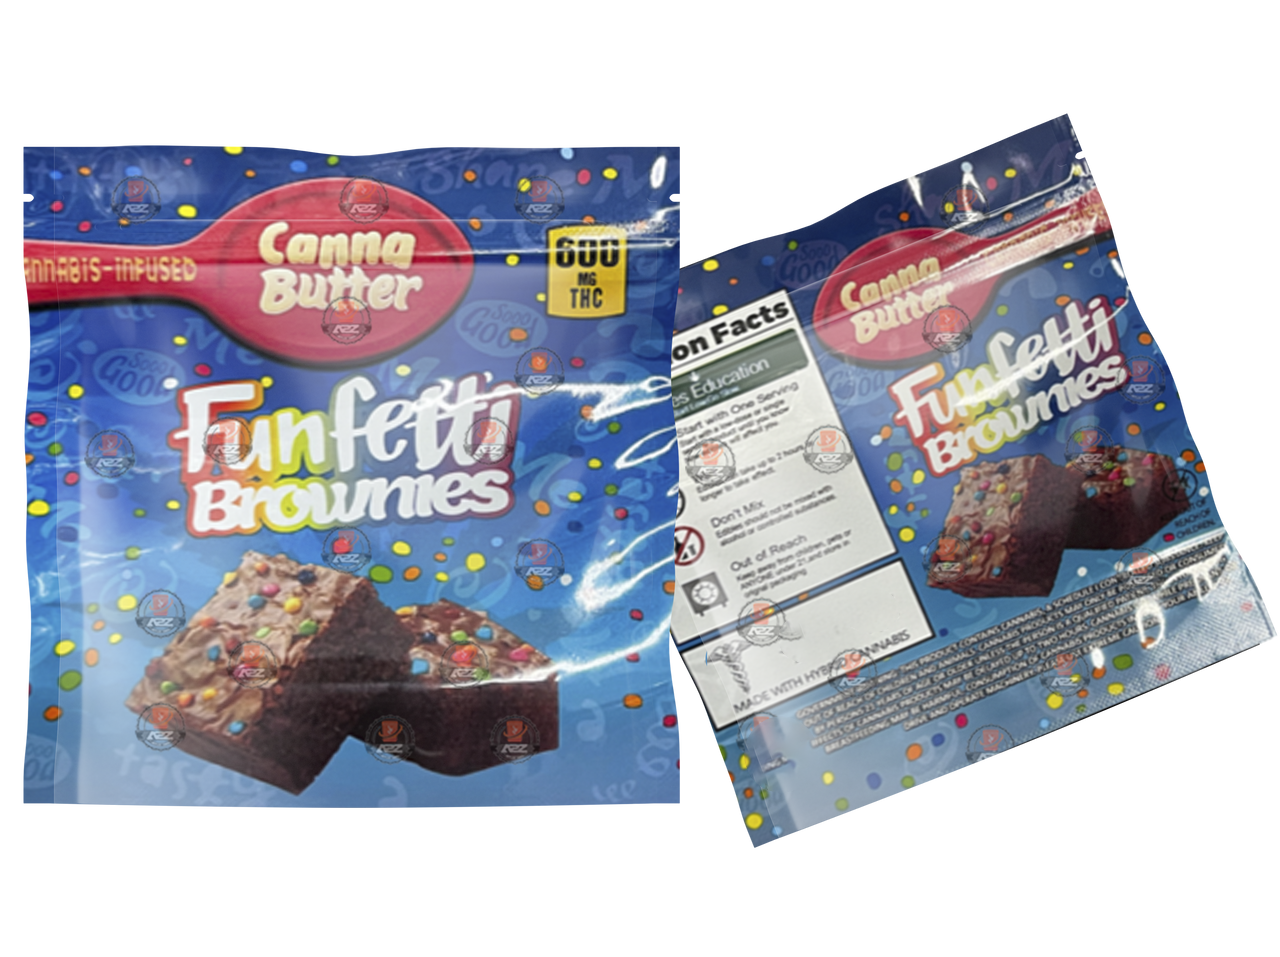 Canna Butter Funfetti Brownies 600mg Mylar Bag -Packaging Only